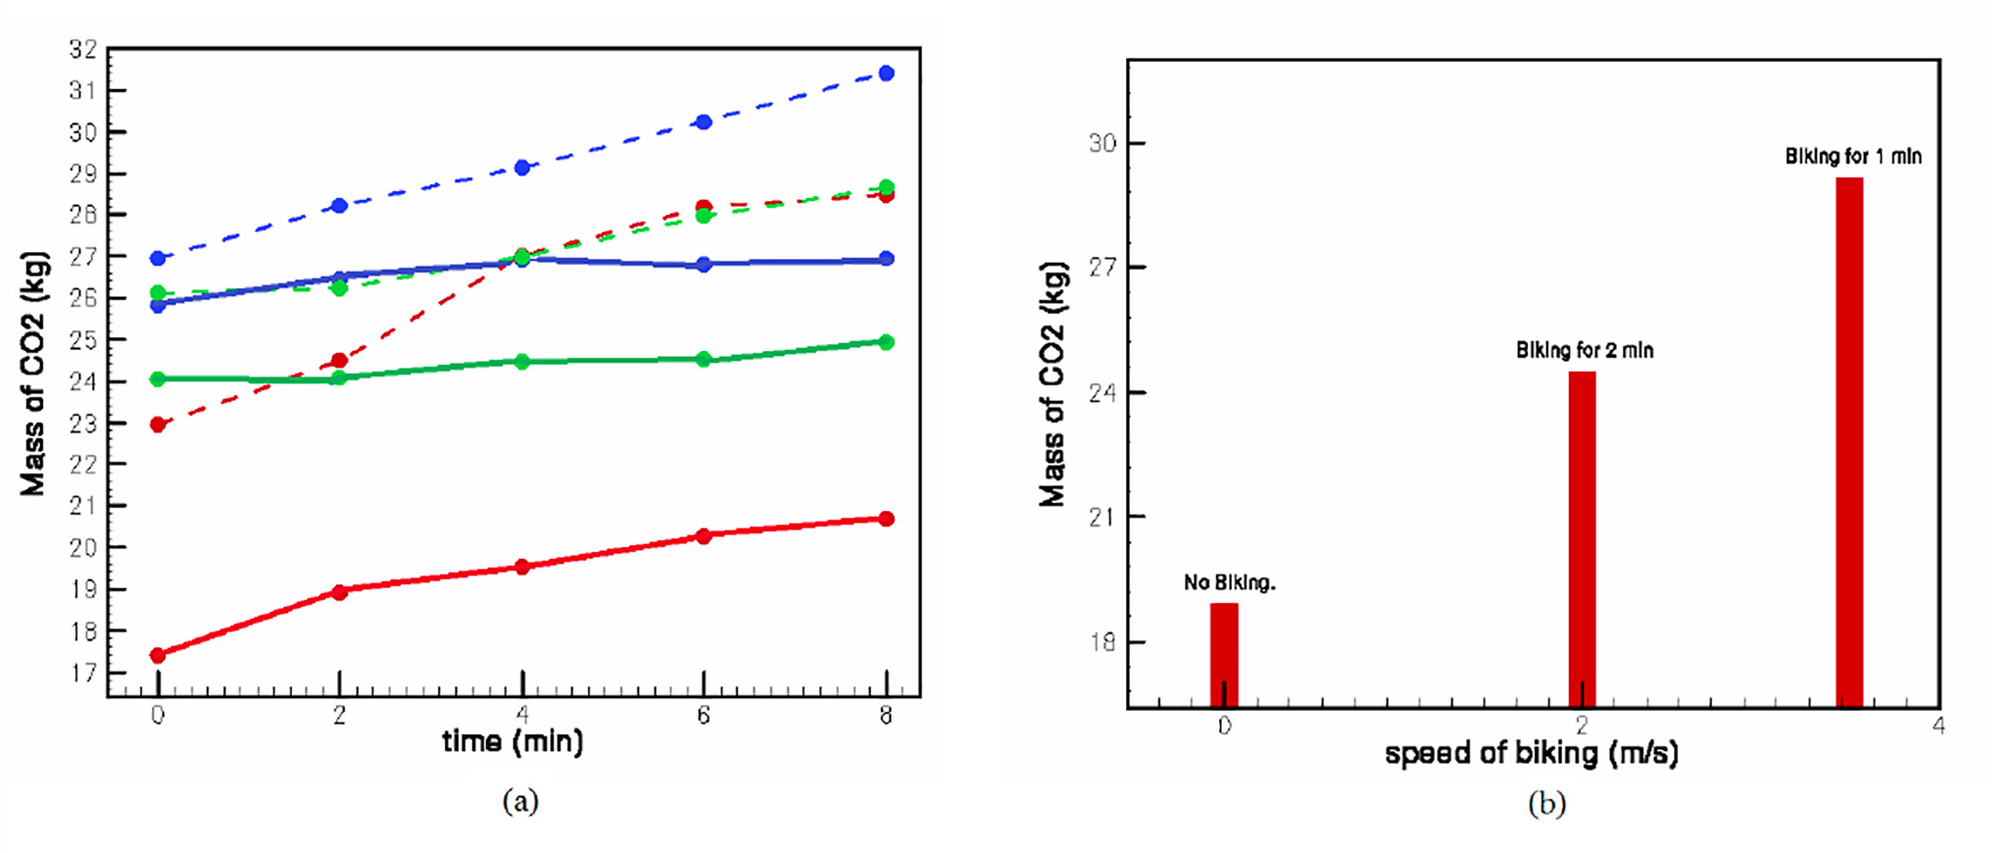 Results of the experiments on the carbon footprint of biking. Note. The image on the left (a) shows the change in CO2 concentration in the room for different students in cases of no-pedaling (solid line) or pedaling (dashed line) at a steady pace. Each color (dashed and solid lines) represents a specific student participant in the experiment. The graph on the right (b) shows the average change in CO2 output, with increasing pedaling speed indicated in meters per second (m/s). 